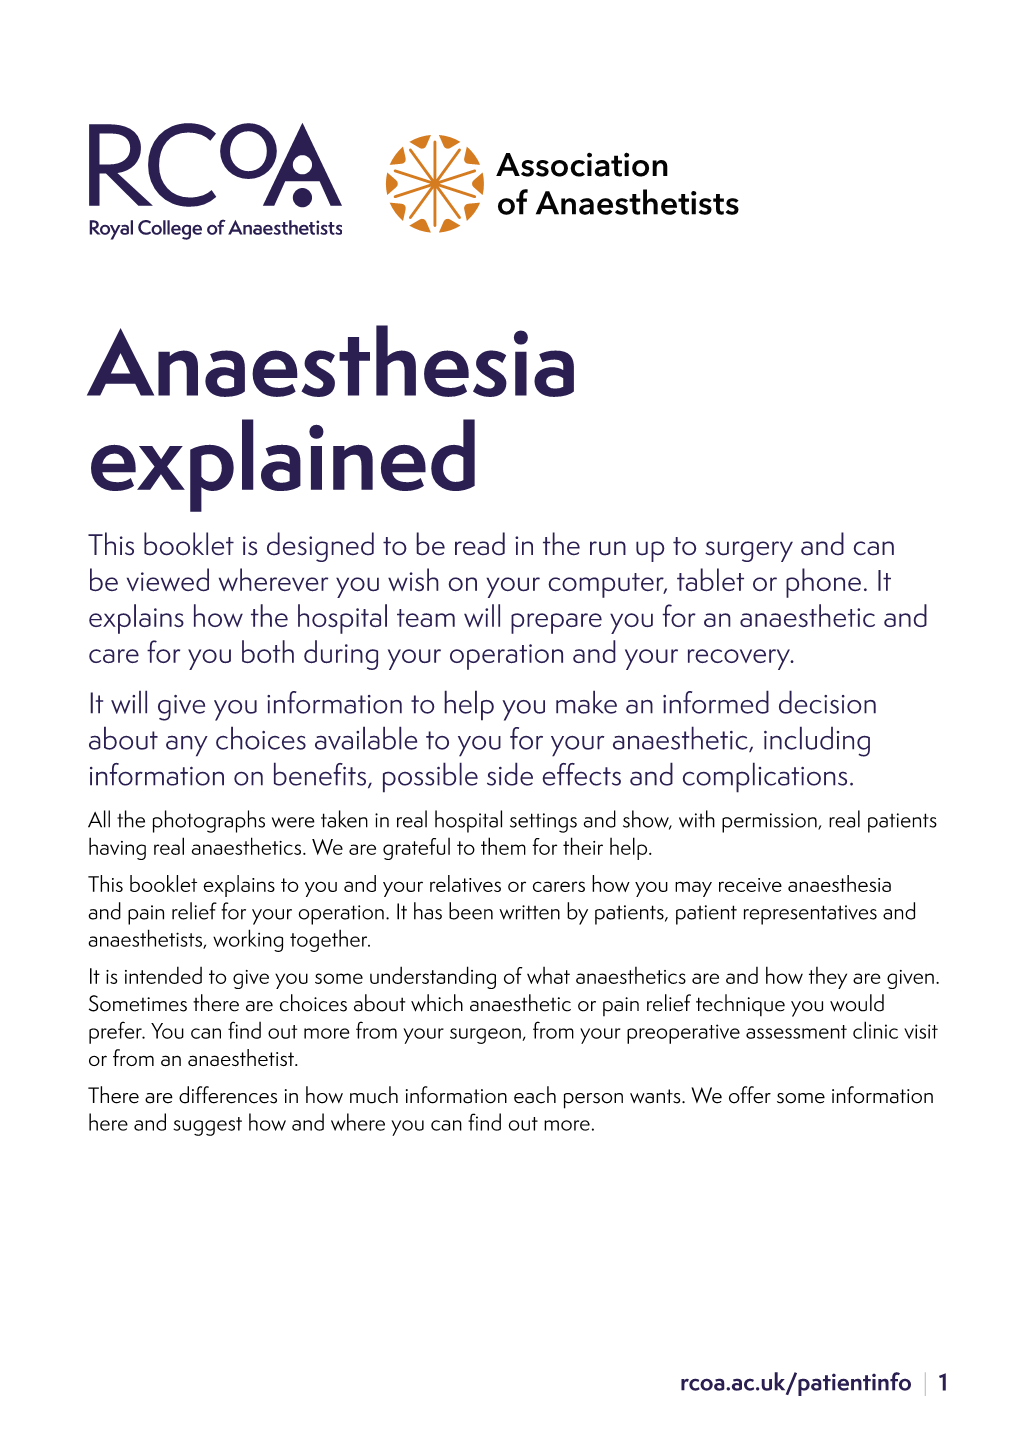 Anaesthesia Explained This Booklet Is Designed to Be Read in the Run up to Surgery and Can Be Viewed Wherever You Wish on Your Computer, Tablet Or Phone